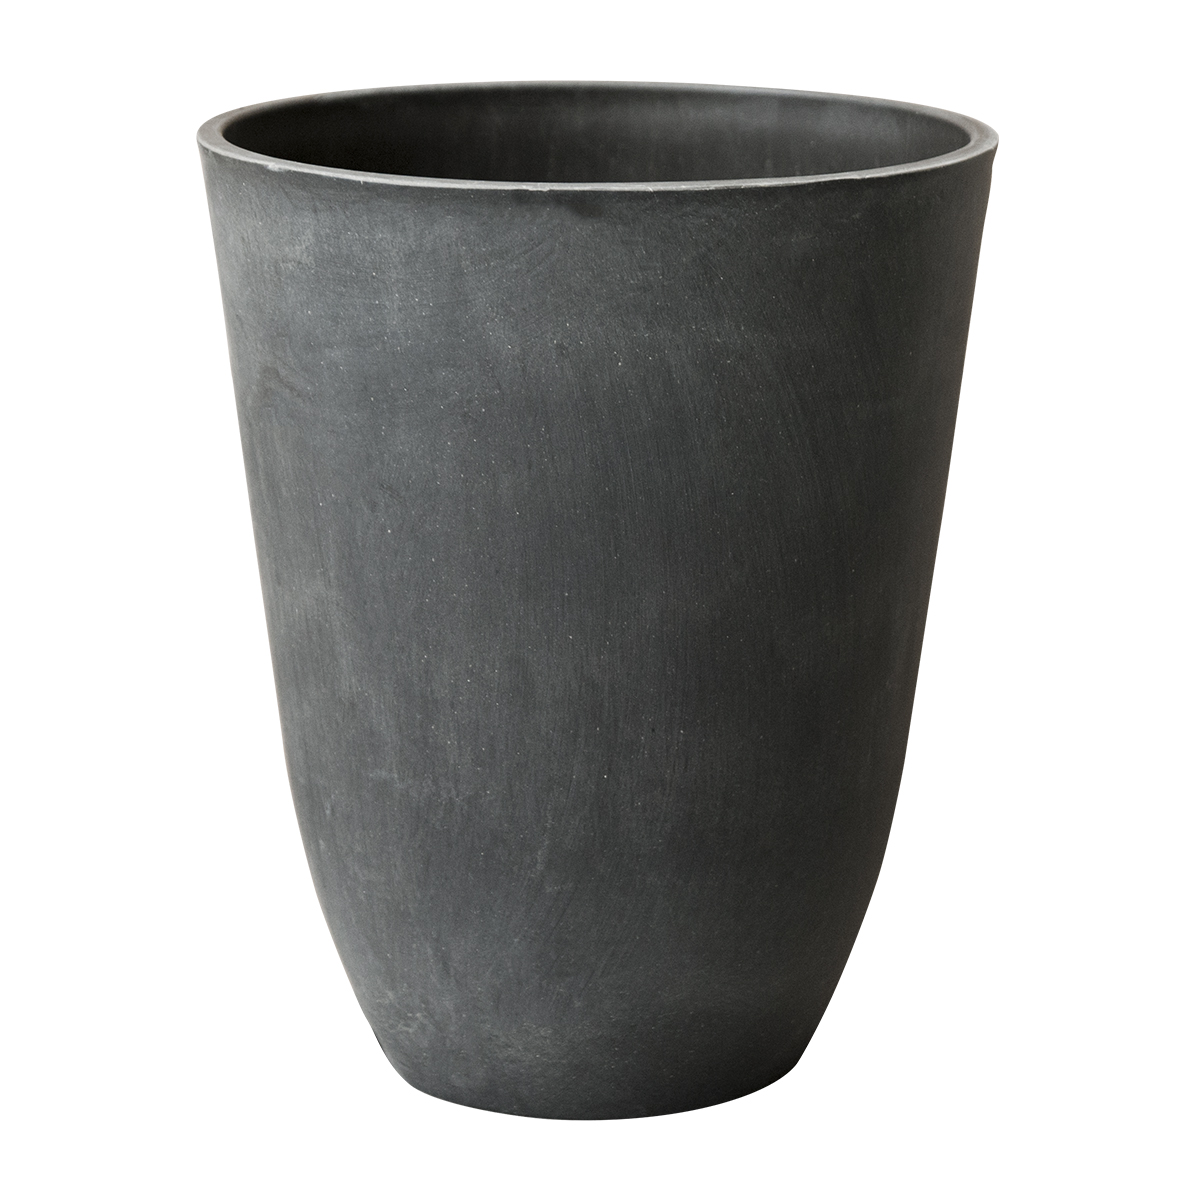 Tall Cement Effect Lightweight Recycled Plastic Planter Pots